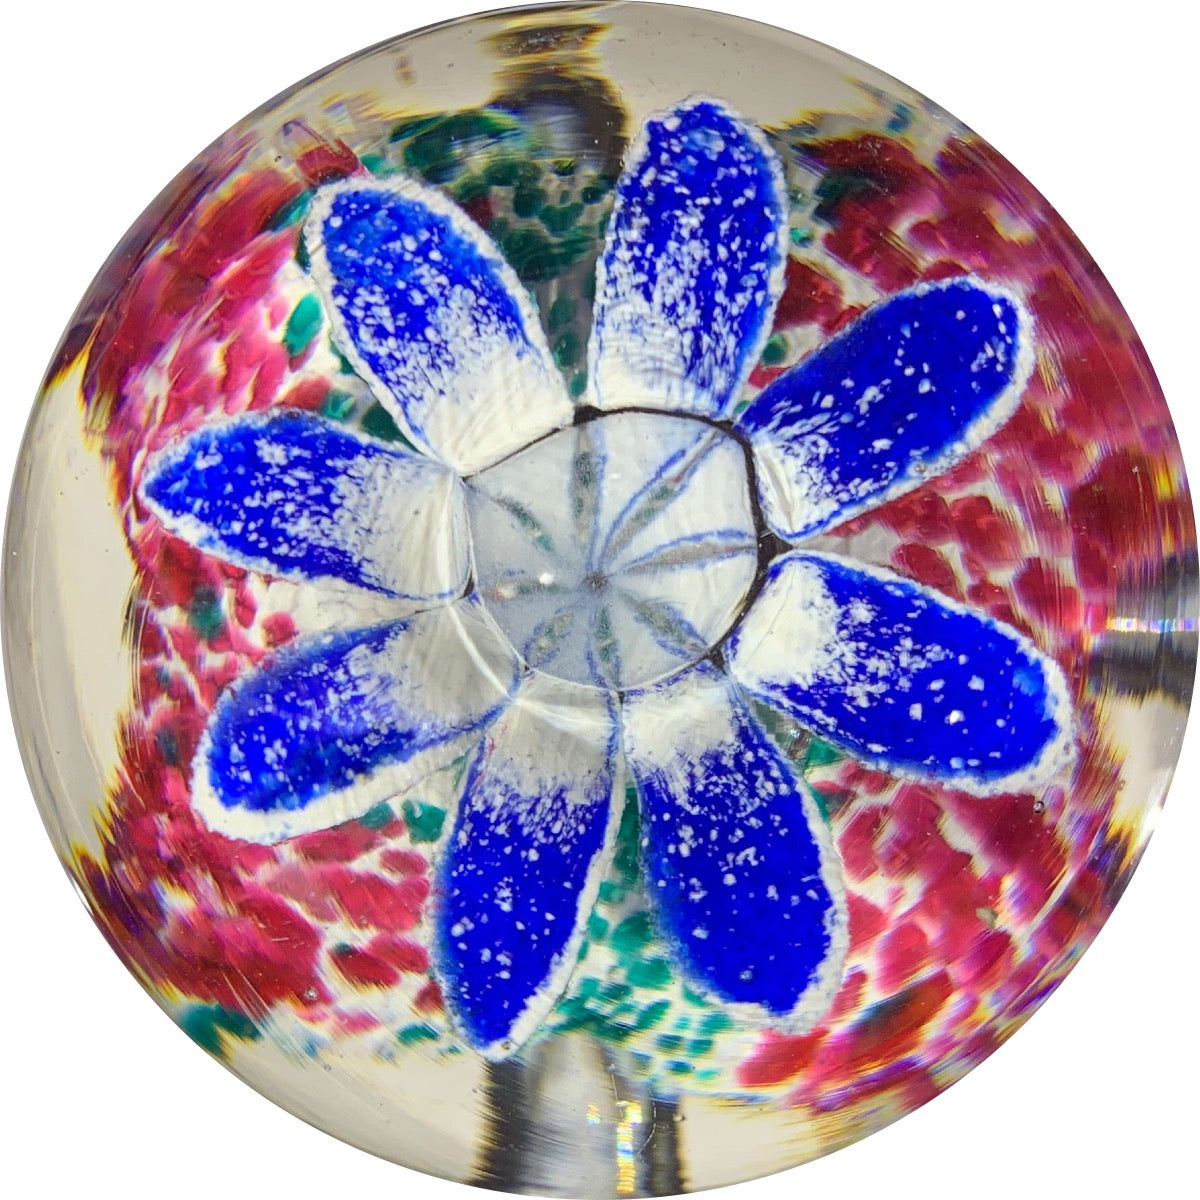 Uncommon Ed Rithner Upright Frit Flower with Colorful Mottled Cushion and Control Bubbles